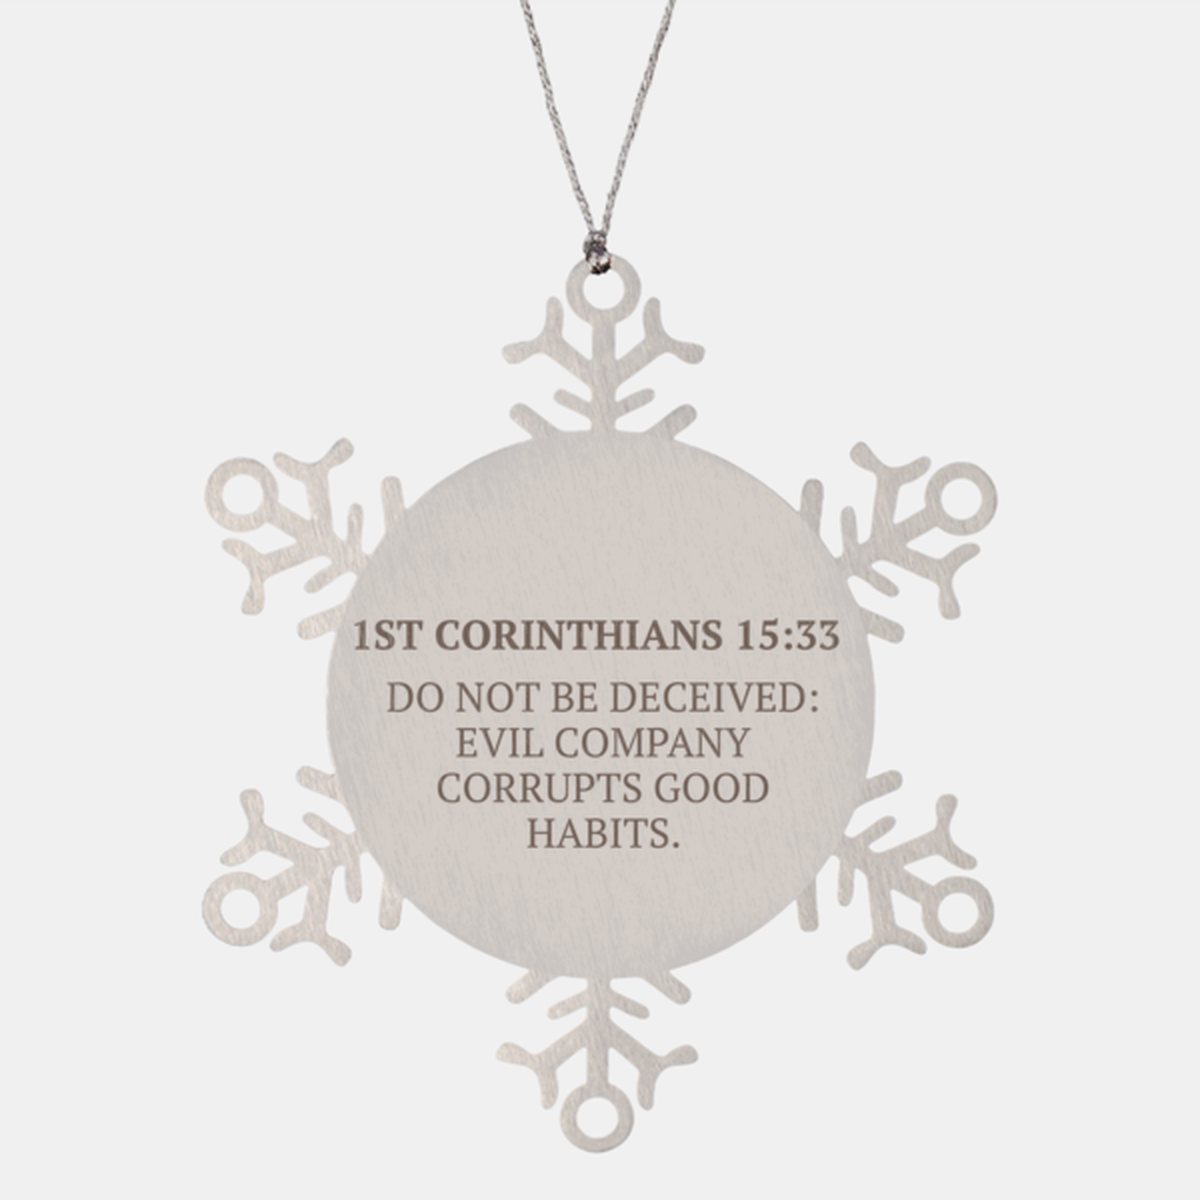 Christian Ornaments For Christmas Tree, Do Not Be Deceived: Evil Company Corrupts Good Habits, Religious Christmas Decorations, Scripture Ornaments Gifts, Bible Verse Ornament